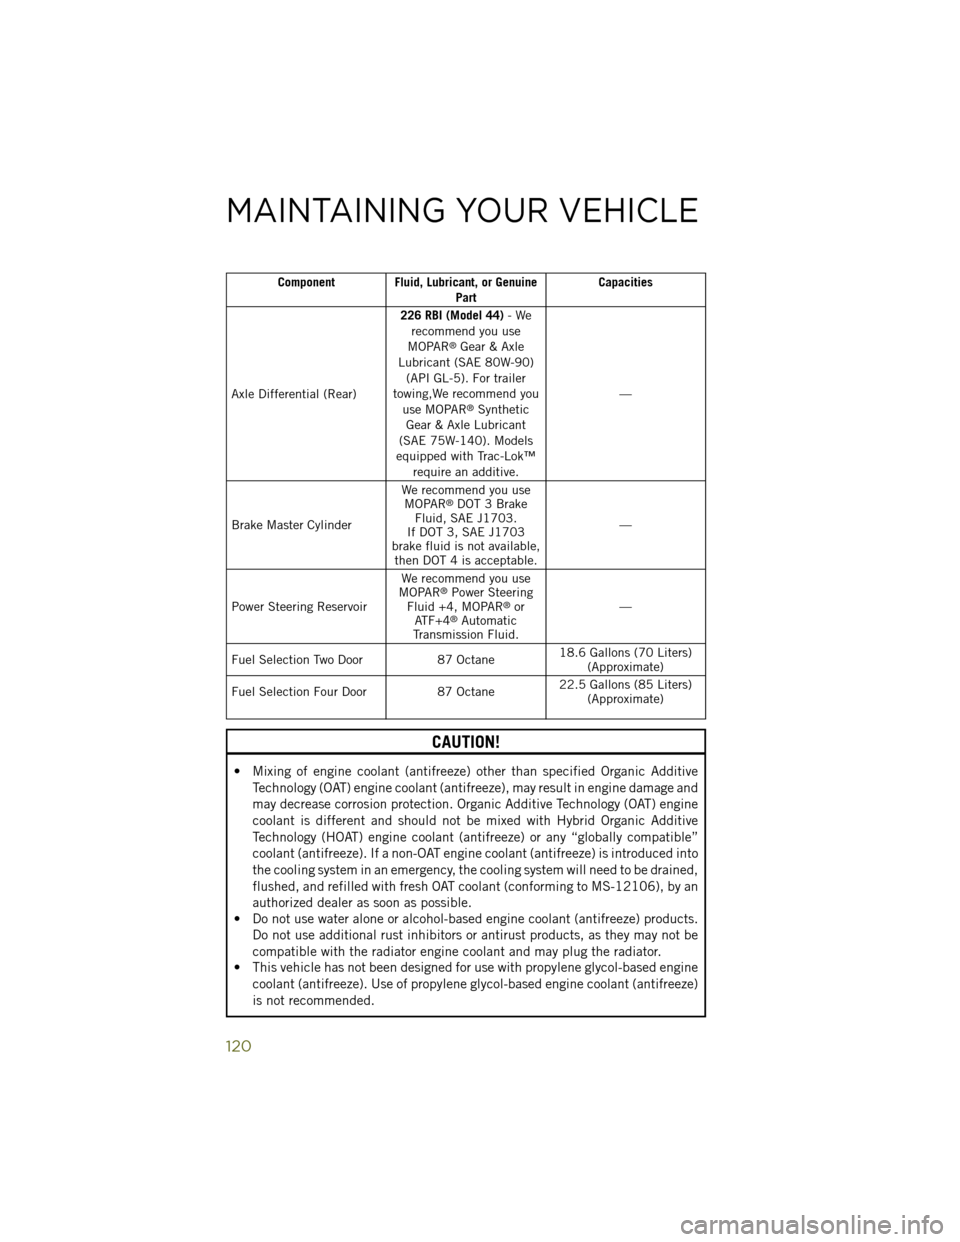 JEEP WRANGLER 2014 JK / 3.G User Guide Component Fluid, Lubricant, or GenuinePartCapacities
Axle Differential (Rear) 226 RBI (Model 44)
-We
recommend you use
MOPAR
®Gear & Axle
Lubricant (SAE 80W-90) (API GL-5). For trailer
towing,We reco